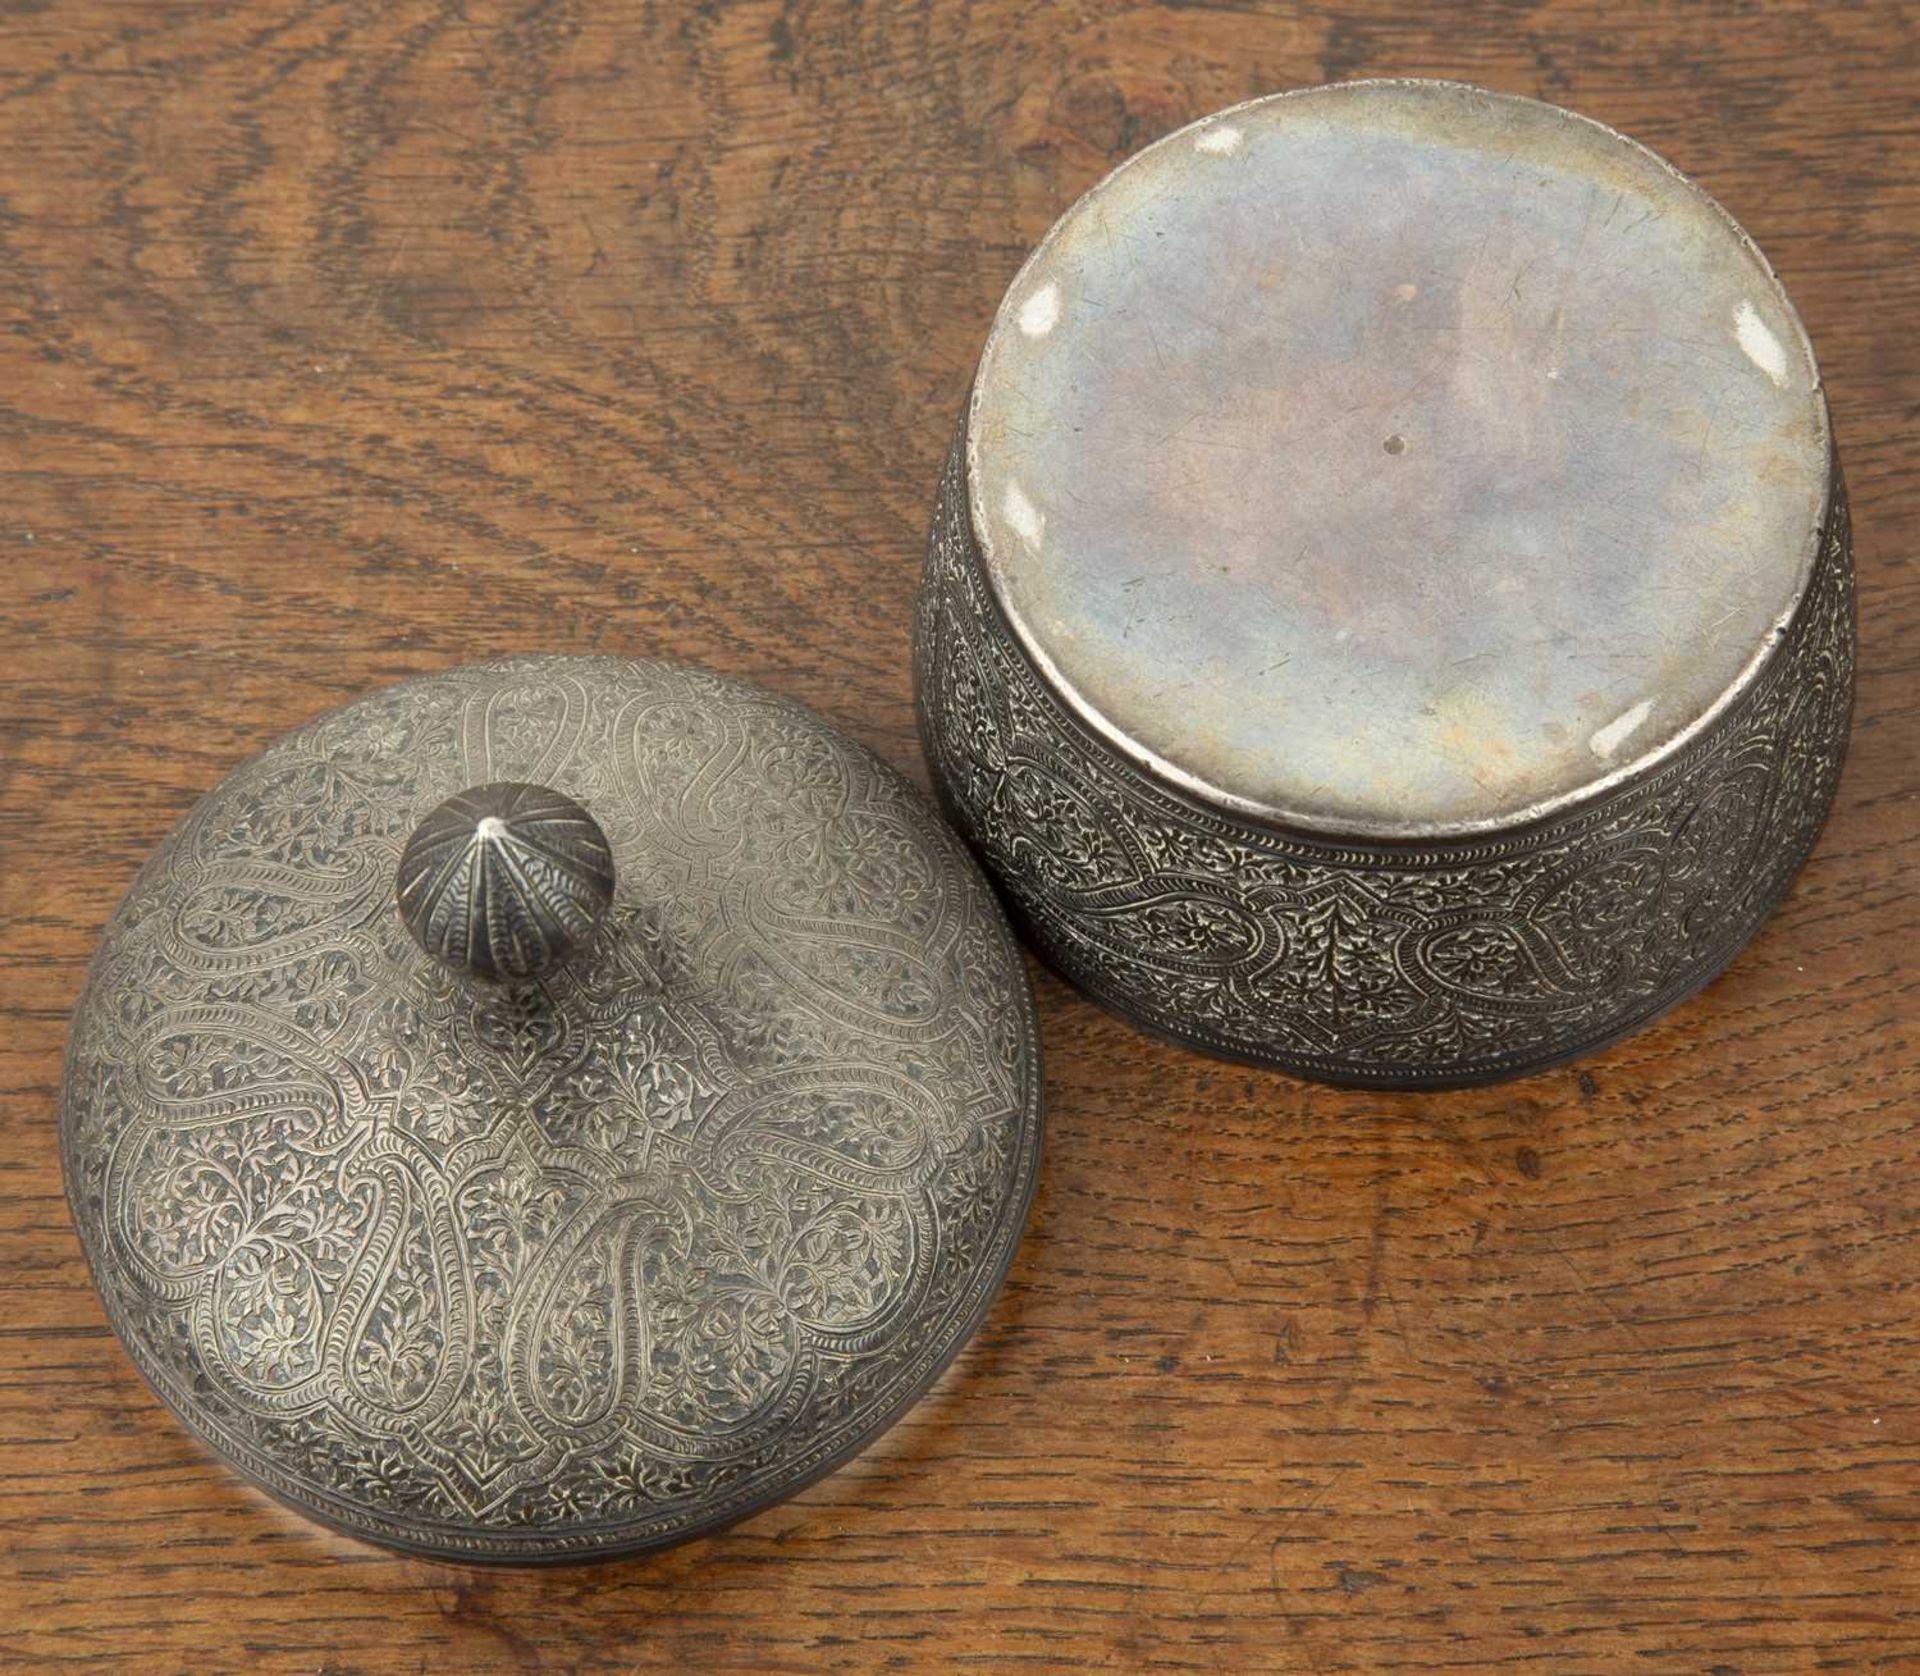 Engraved white metal small powder case and cover Indian with paisley designs, and knopped finial - Image 4 of 4